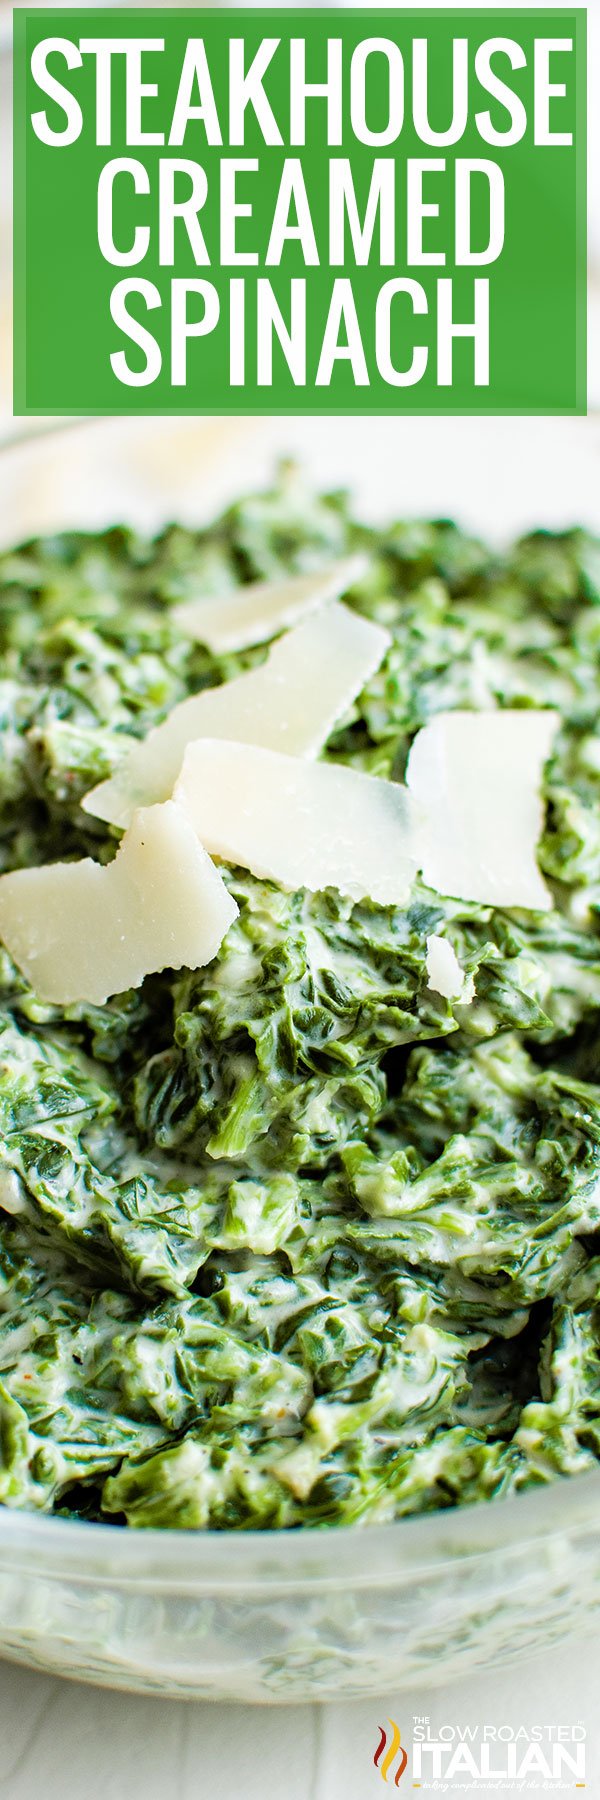 steakhouse creamed spinach.